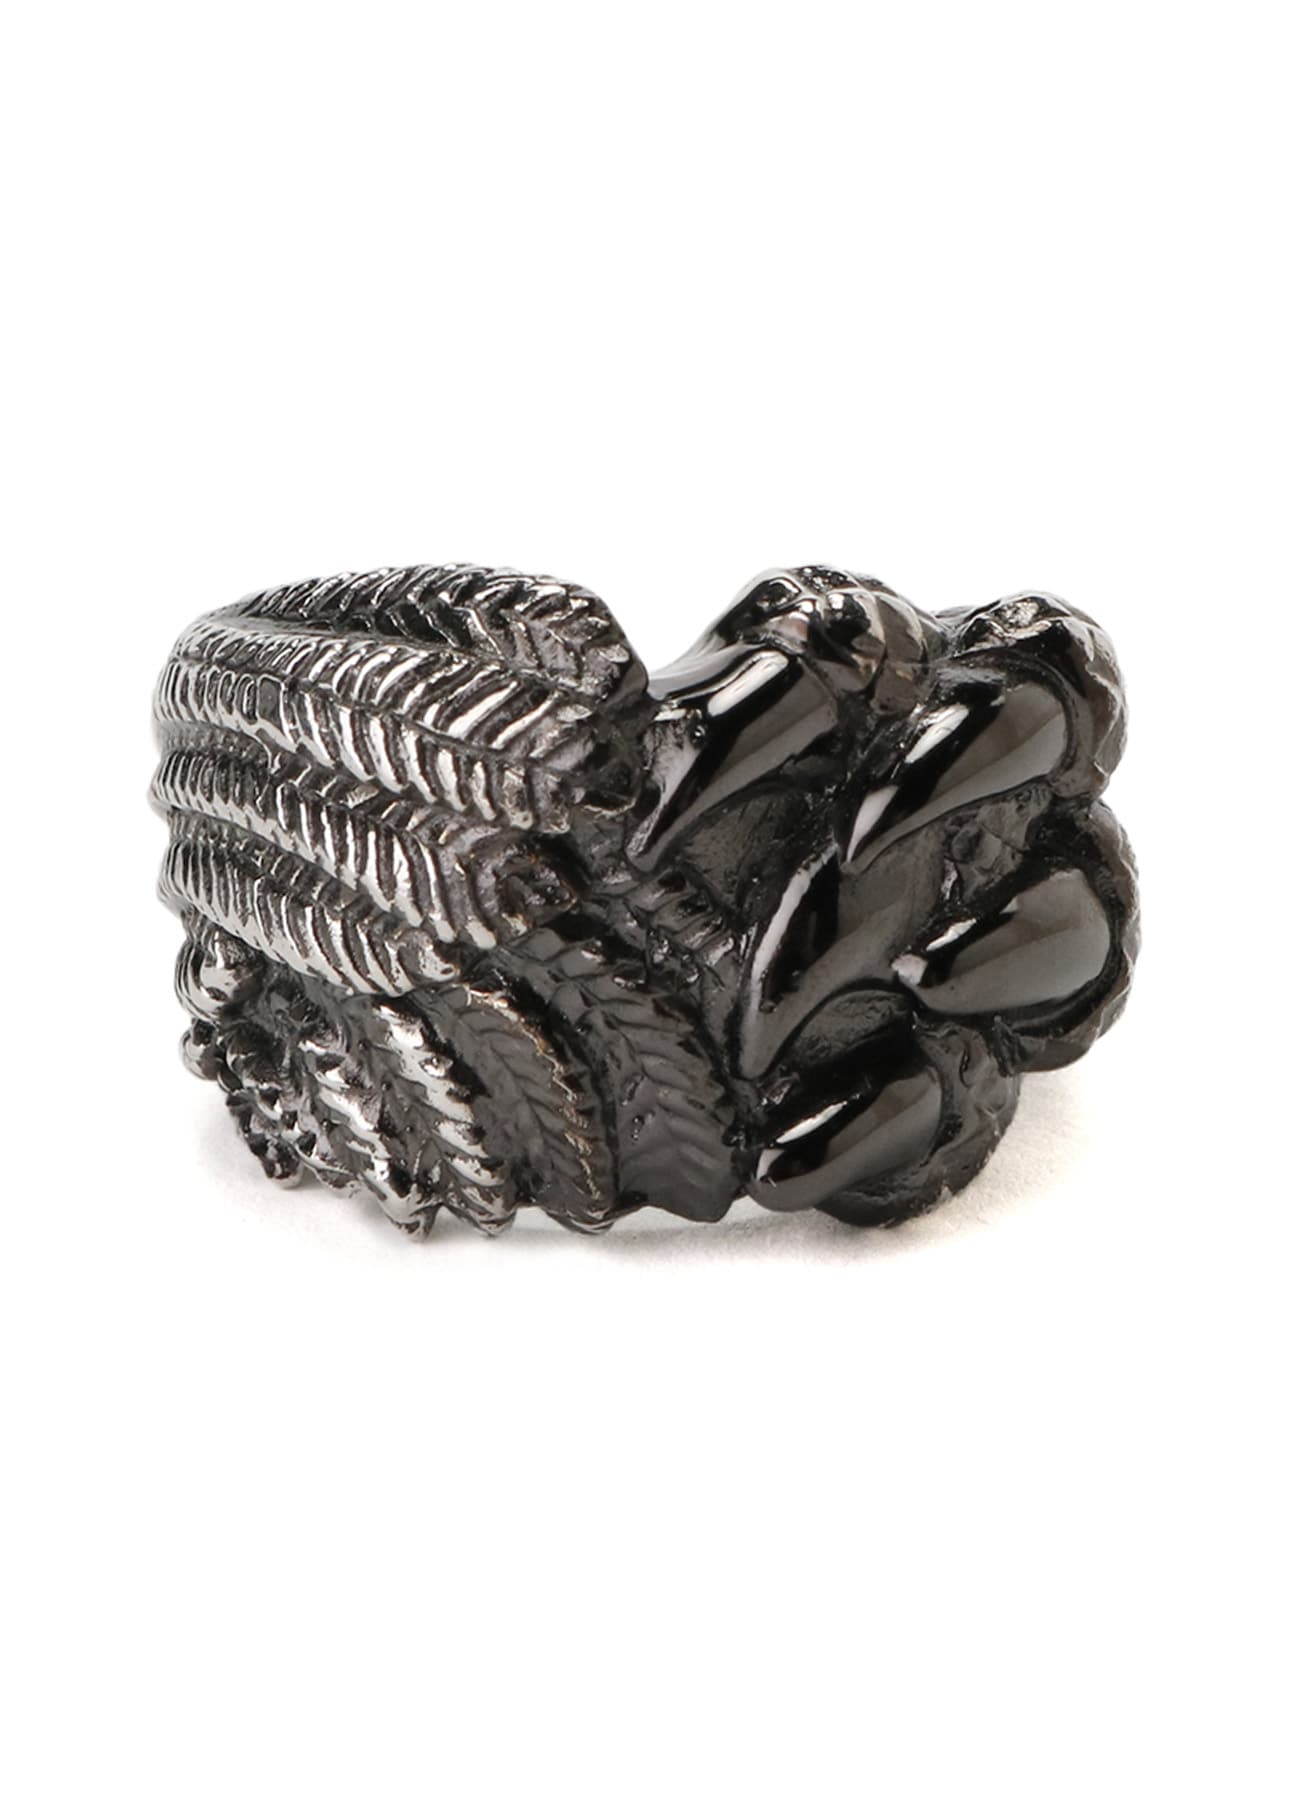 SILVER 950 DRAGON CLAW FEATHER RING